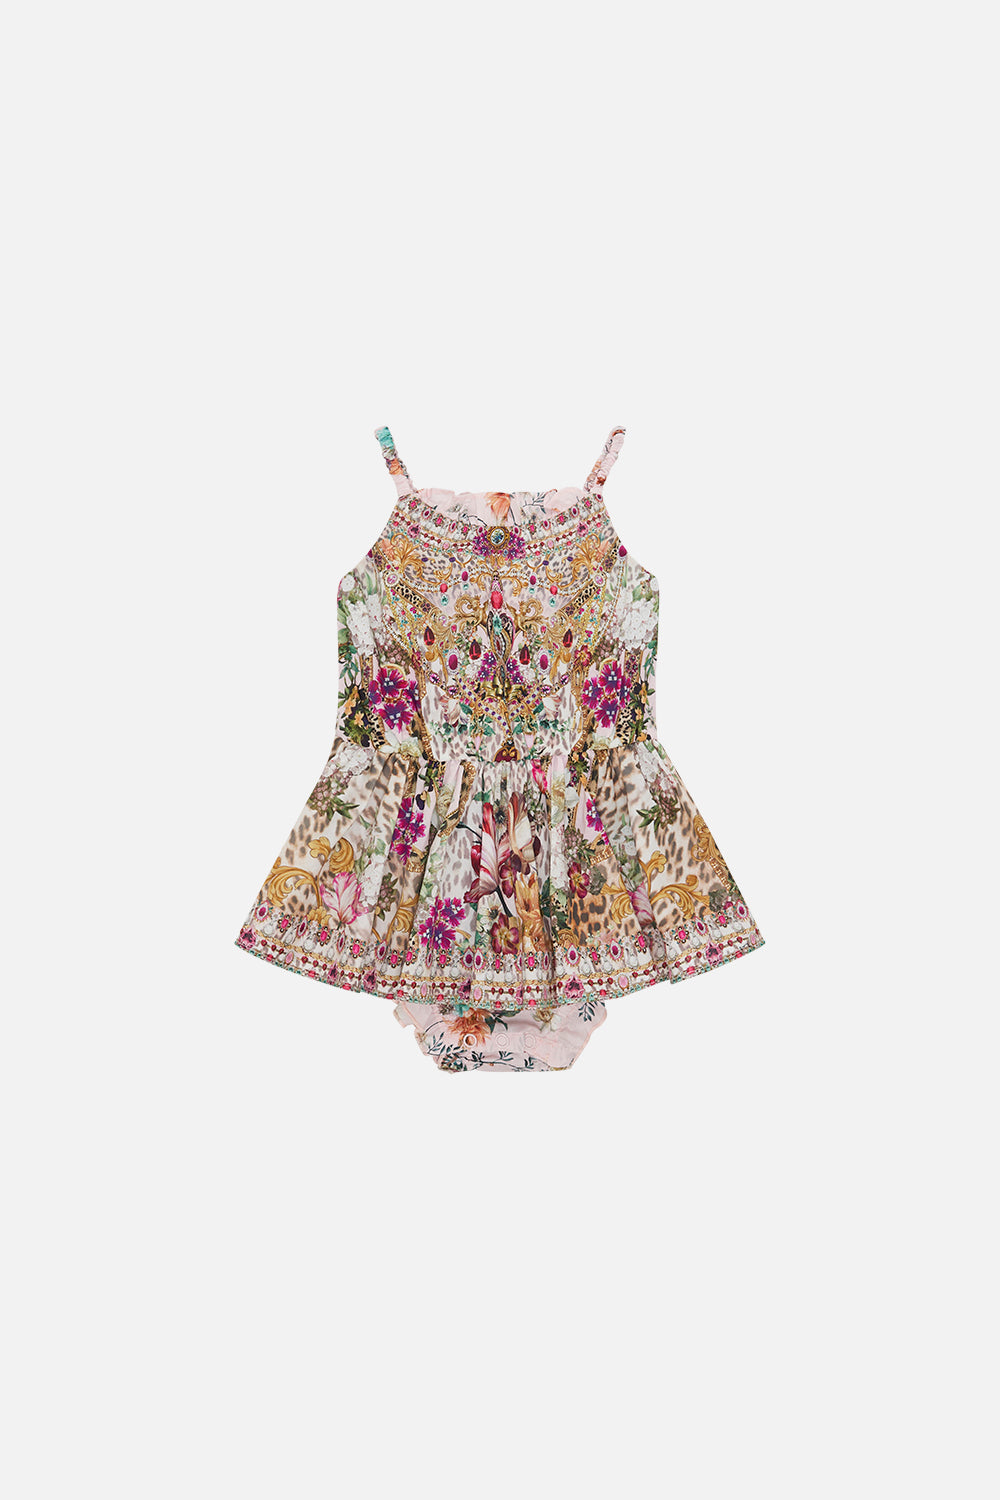 Product view of MILLA BY CAMILLA pink babies jumpdress in Bambino Bliss print 